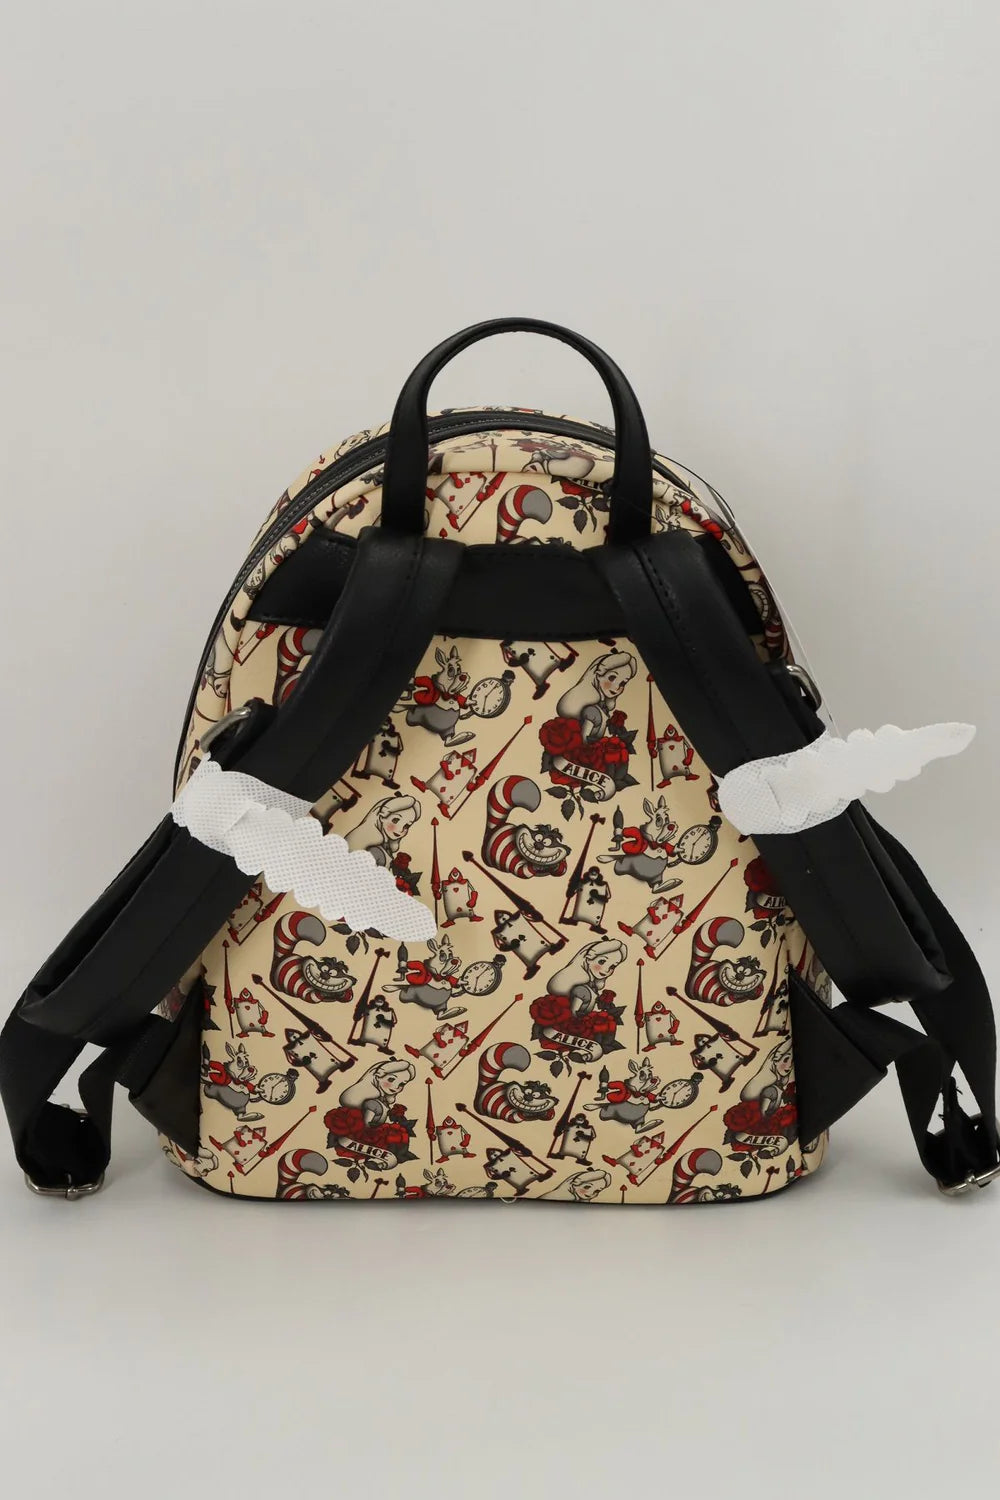 The Alice In Wonderland Loungefly Collection Is Mad With Style - bags 